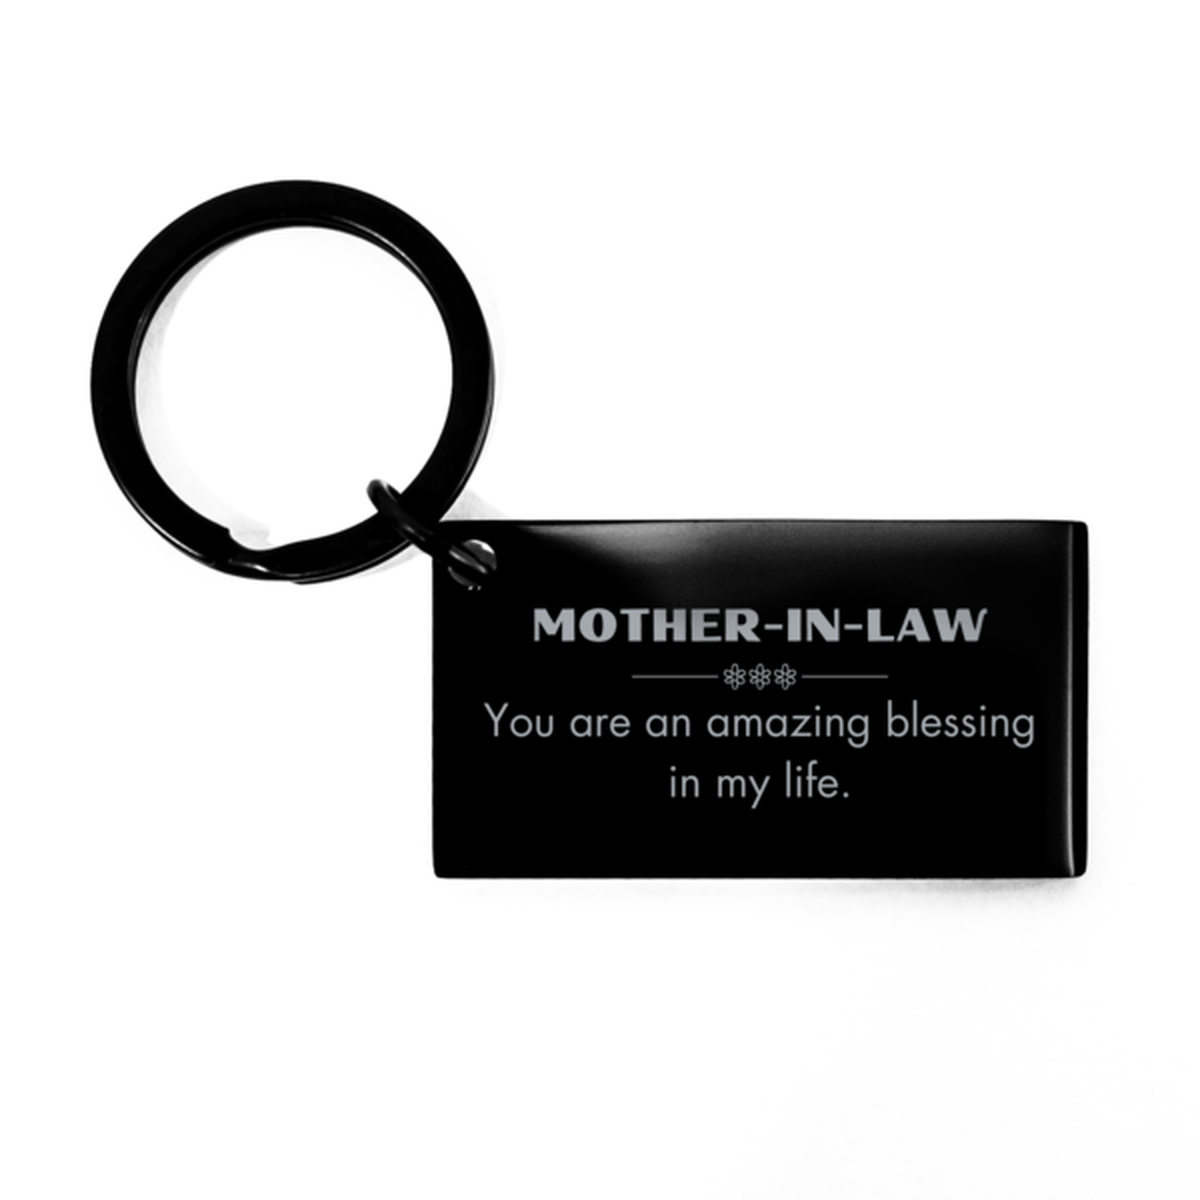 Mother-In-Law Keychain, You are an amazing blessing in my life, Thank You Gifts For Mother-In-Law, Inspirational Birthday Christmas Unique Gifts For Mother-In-Law